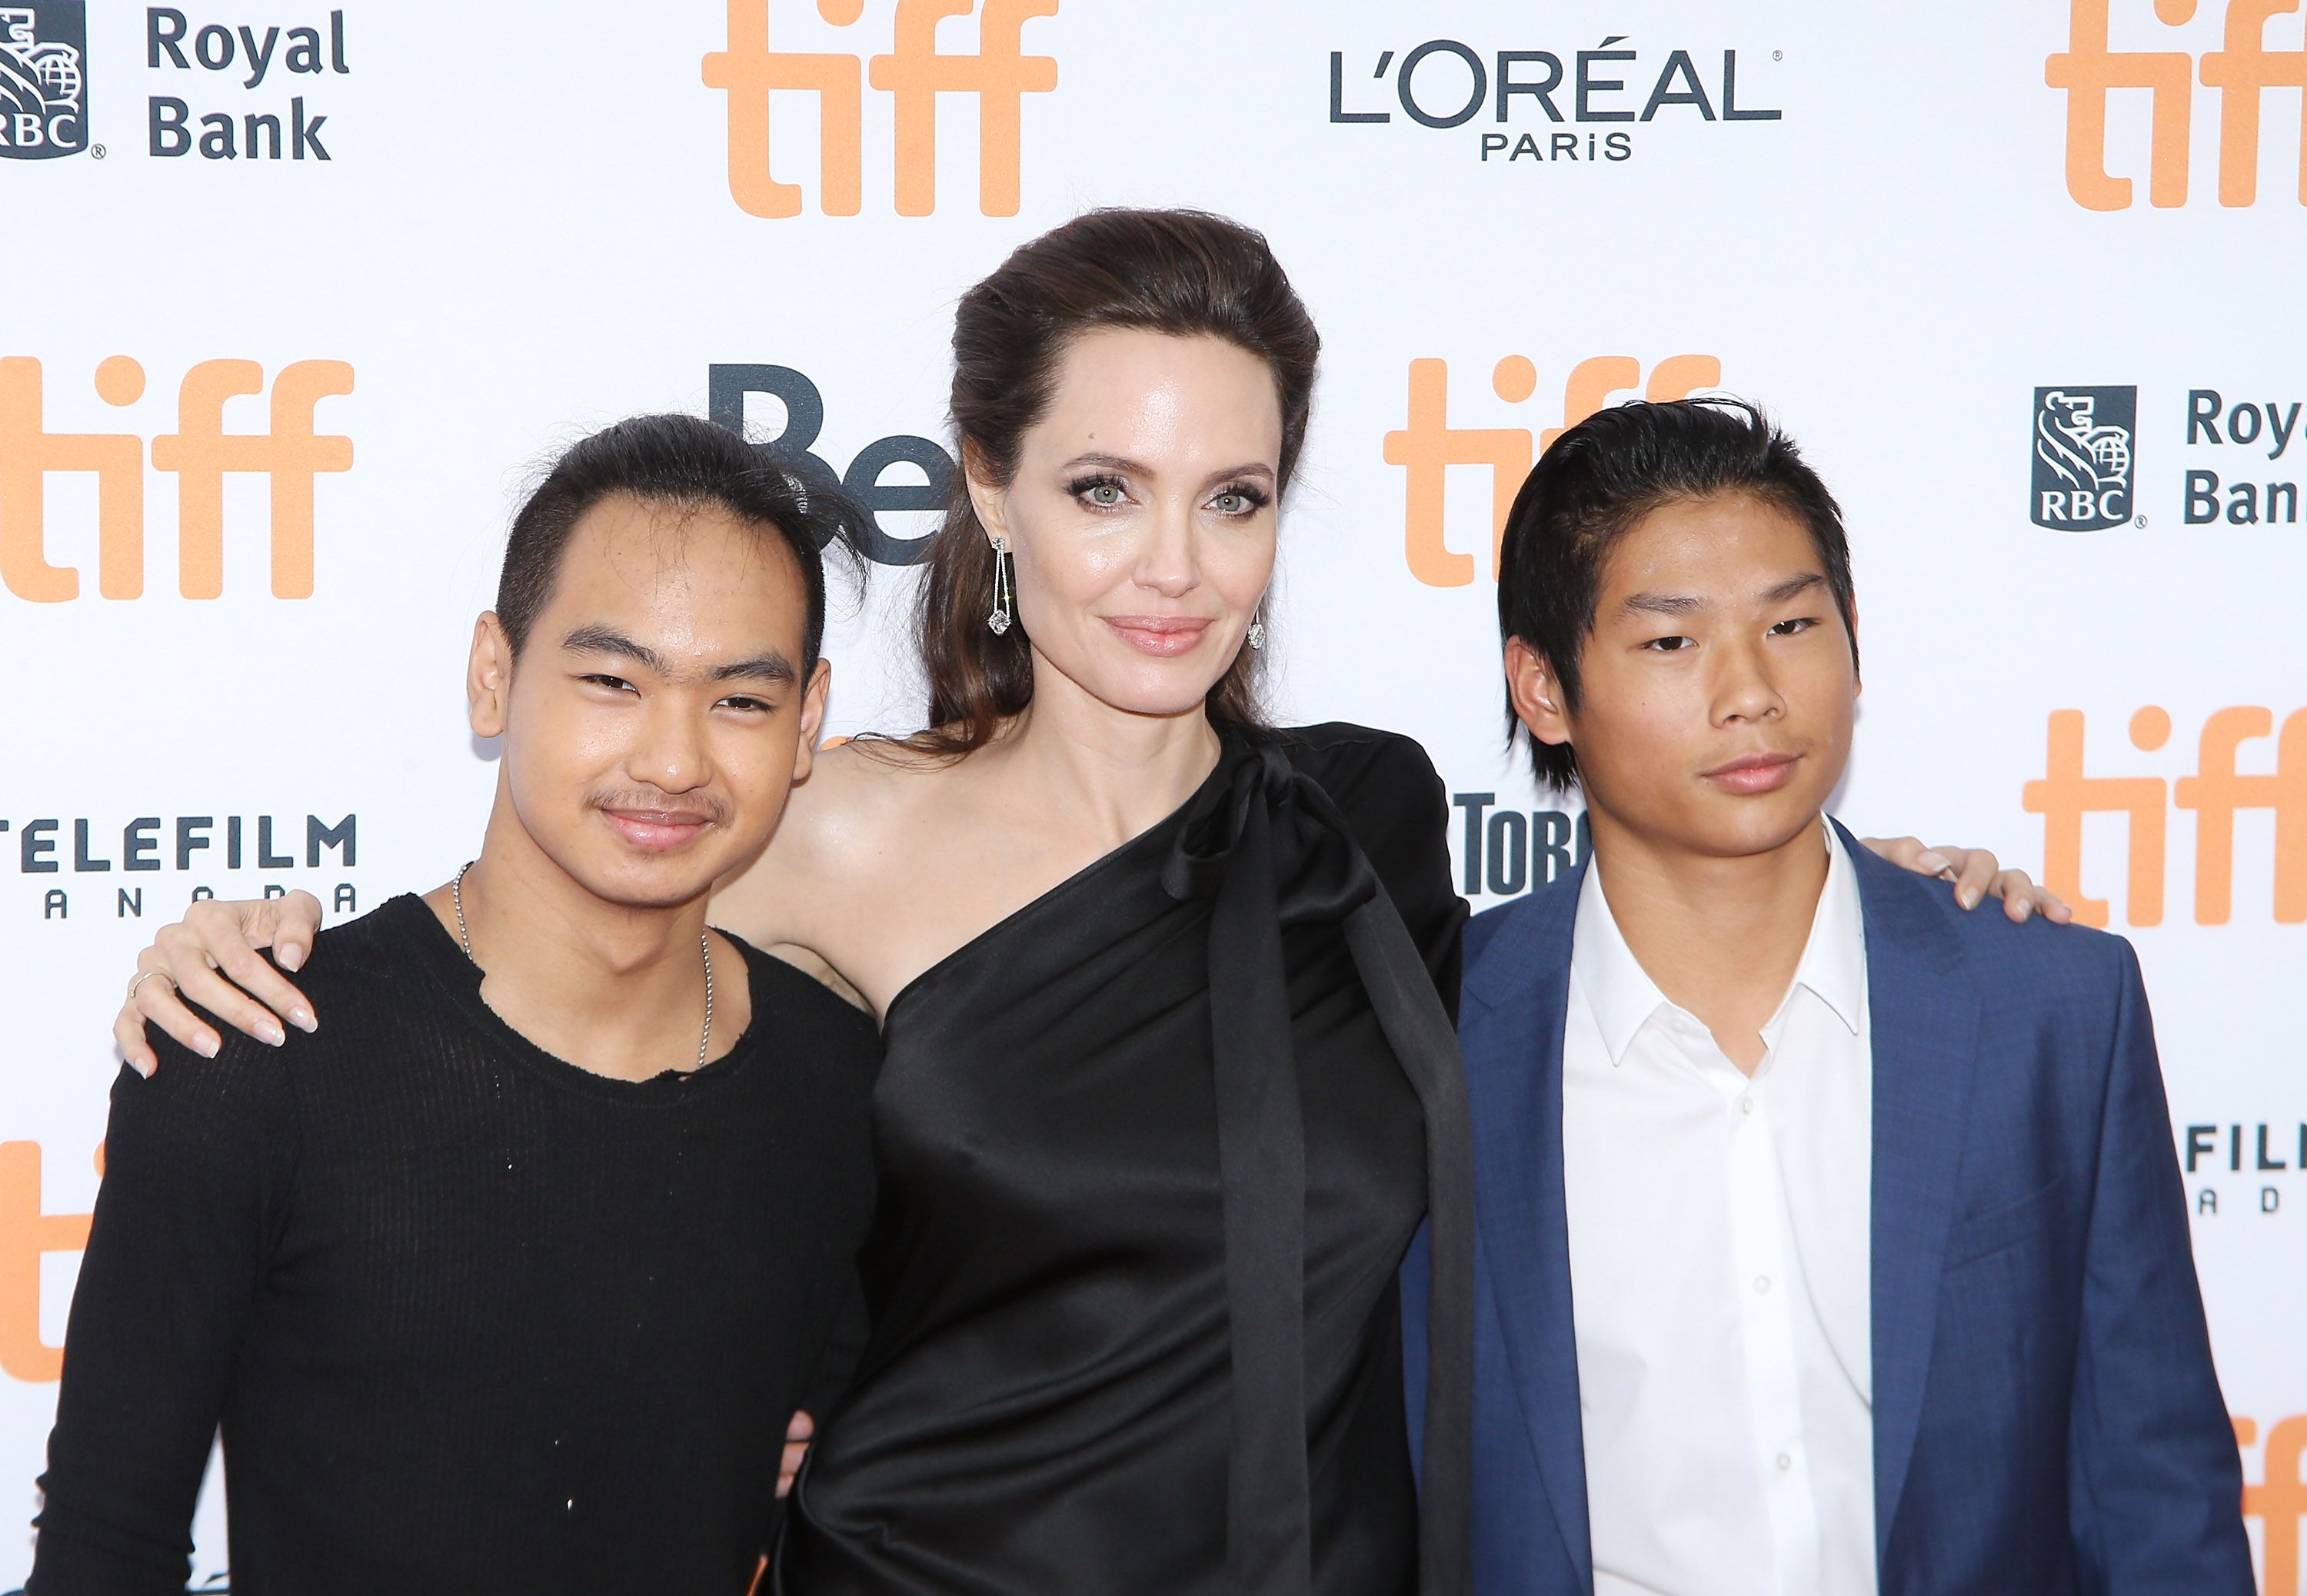 Angelina Jolie with her sons, Maddox Chivan Jolie-Pitt (L) and Pax Thien Jolie-Pitt arrive to "First They Killed My Father: A Daughter of Cambodia Remembers" premiere on September 11, 2017 in Toronto, Canada. | Source: Getty Images